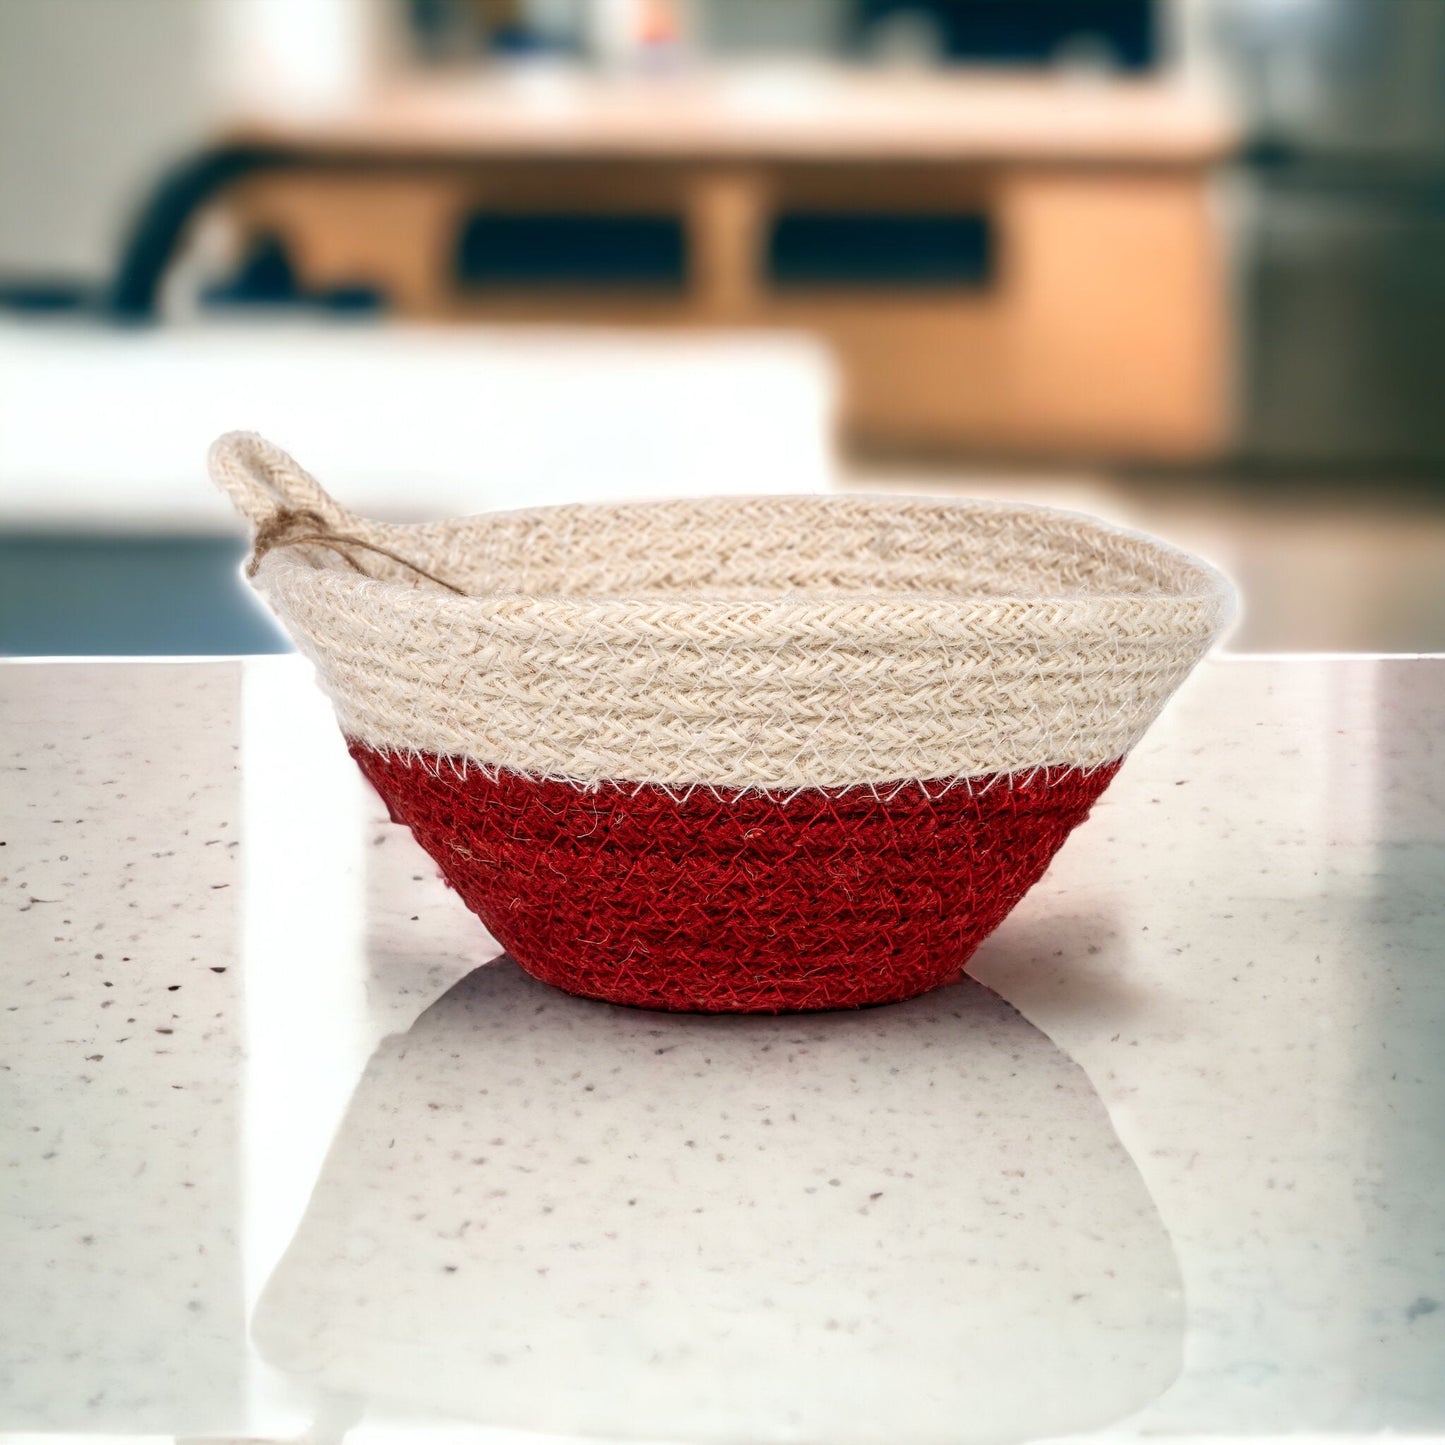 Red and Woven jute red and white basket on white marble kitchen counter